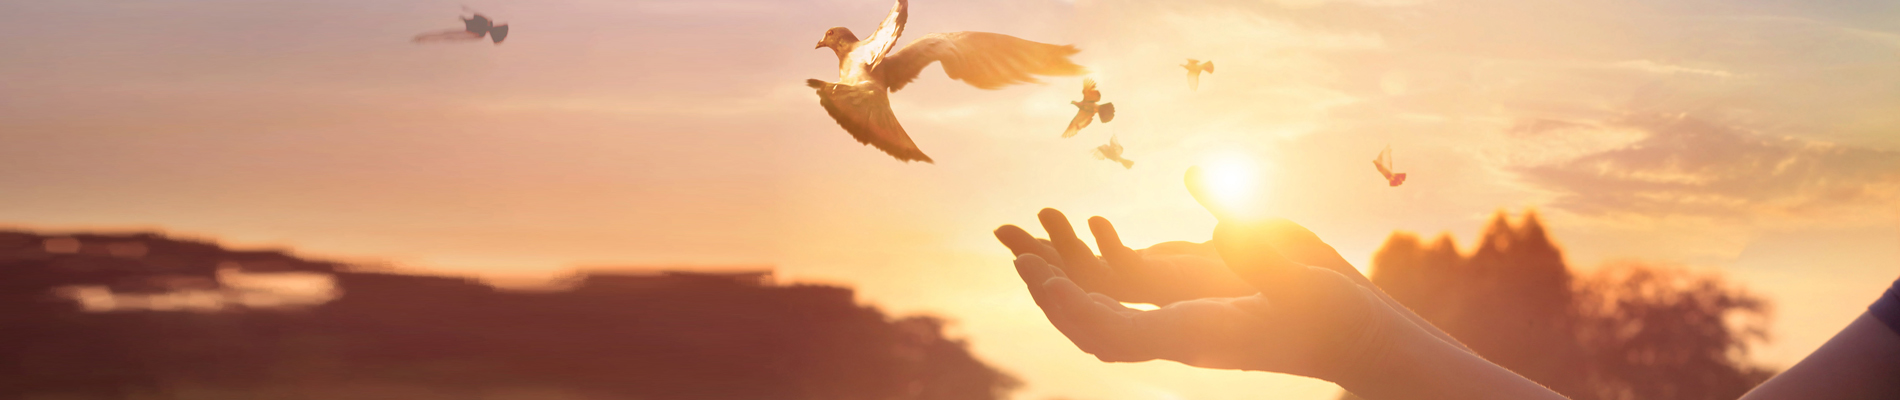 Open hands releasing a dove with a sunny sky with birds